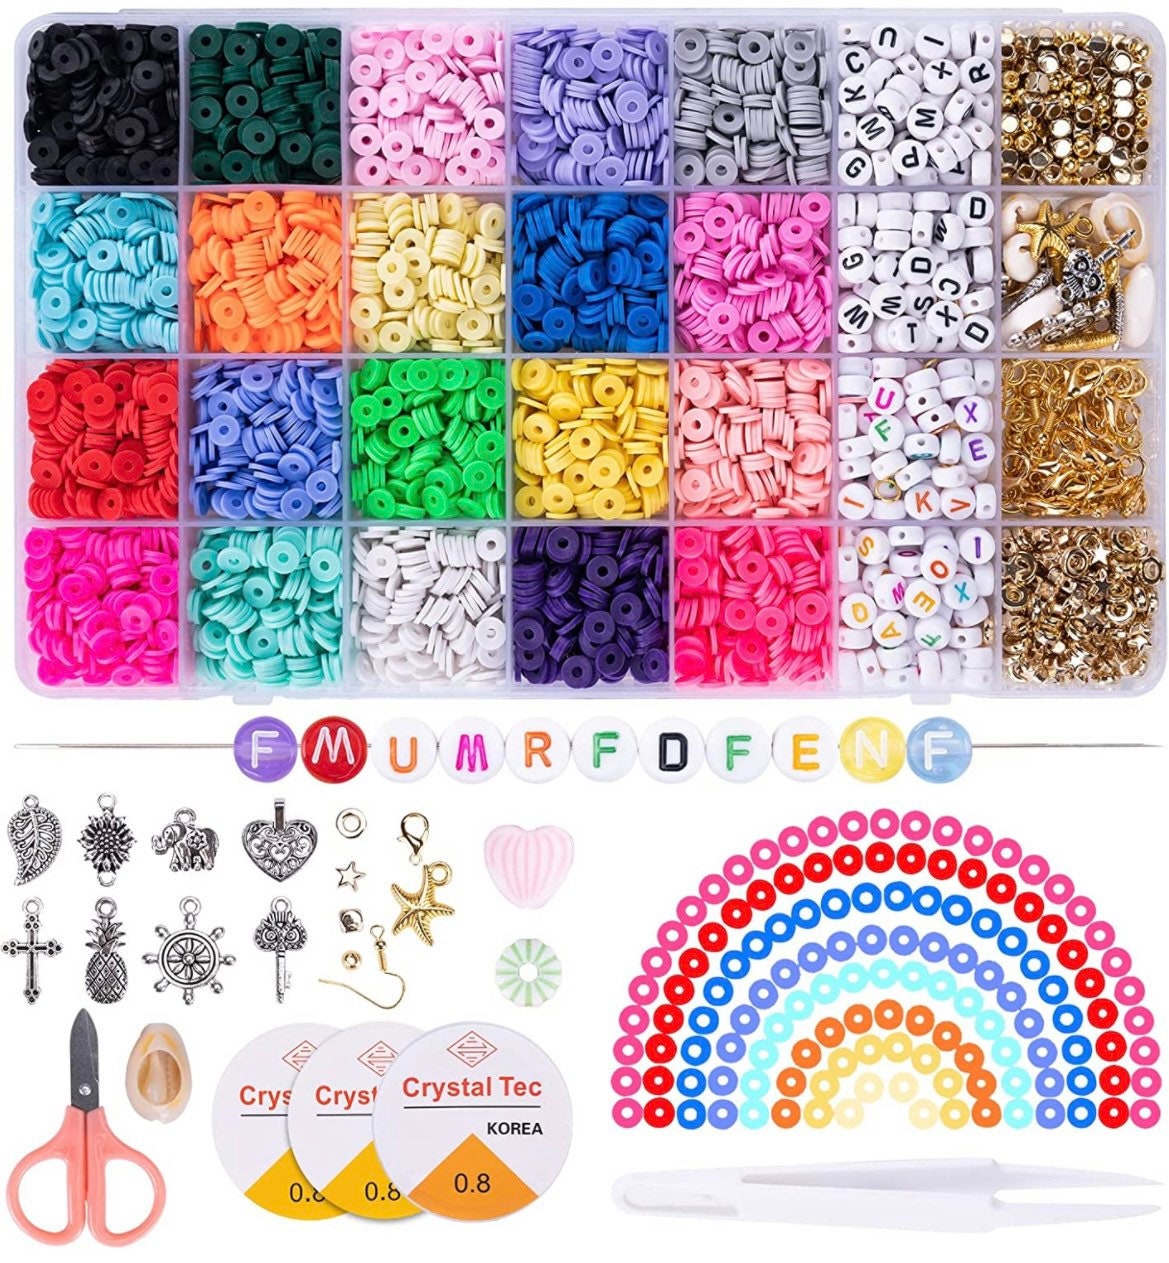 Beads for Bracelet Making 6000-Piece $11.99 at